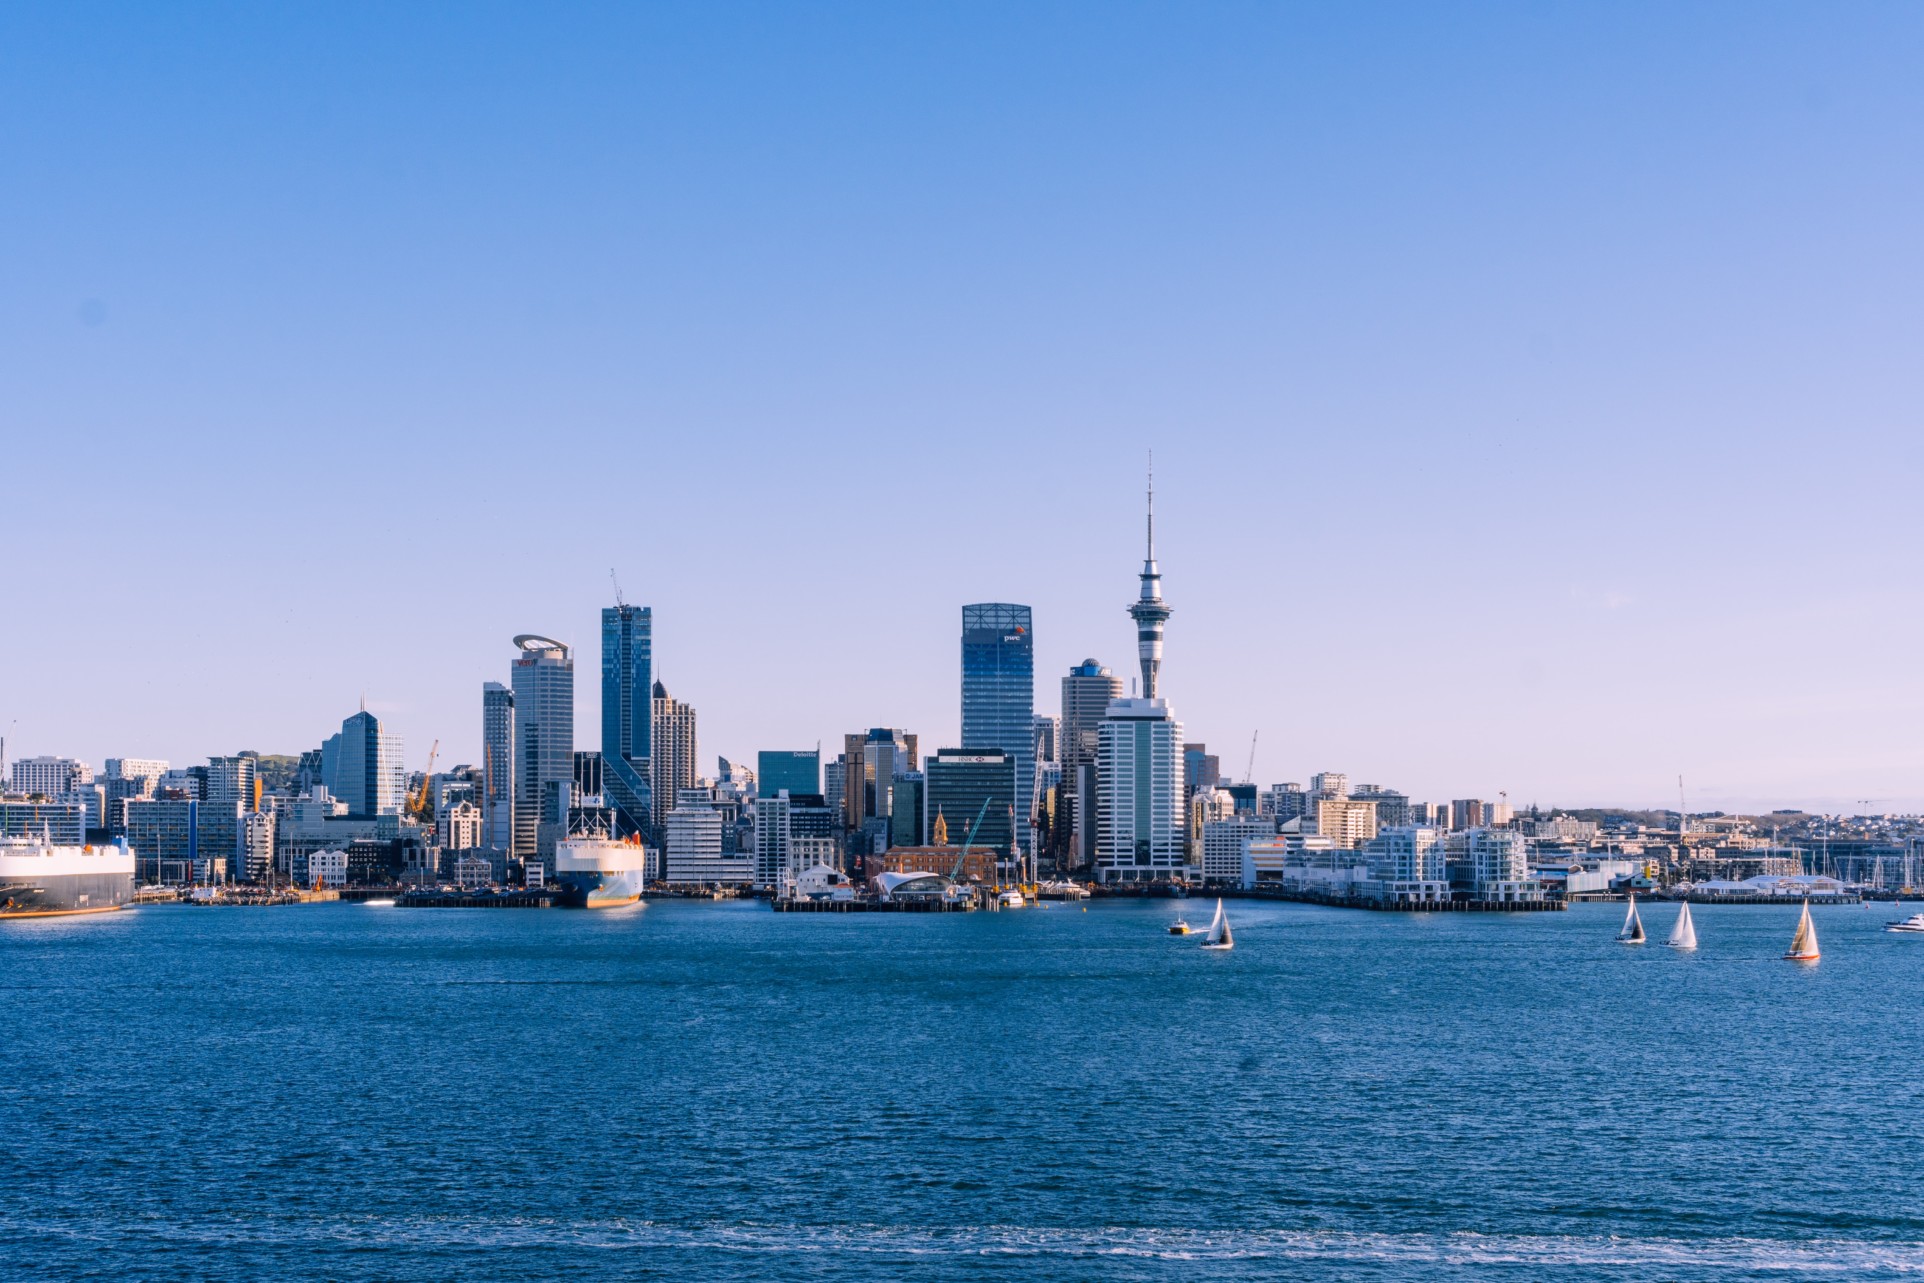 Become an Accredited Employer with NZ Visa Connections